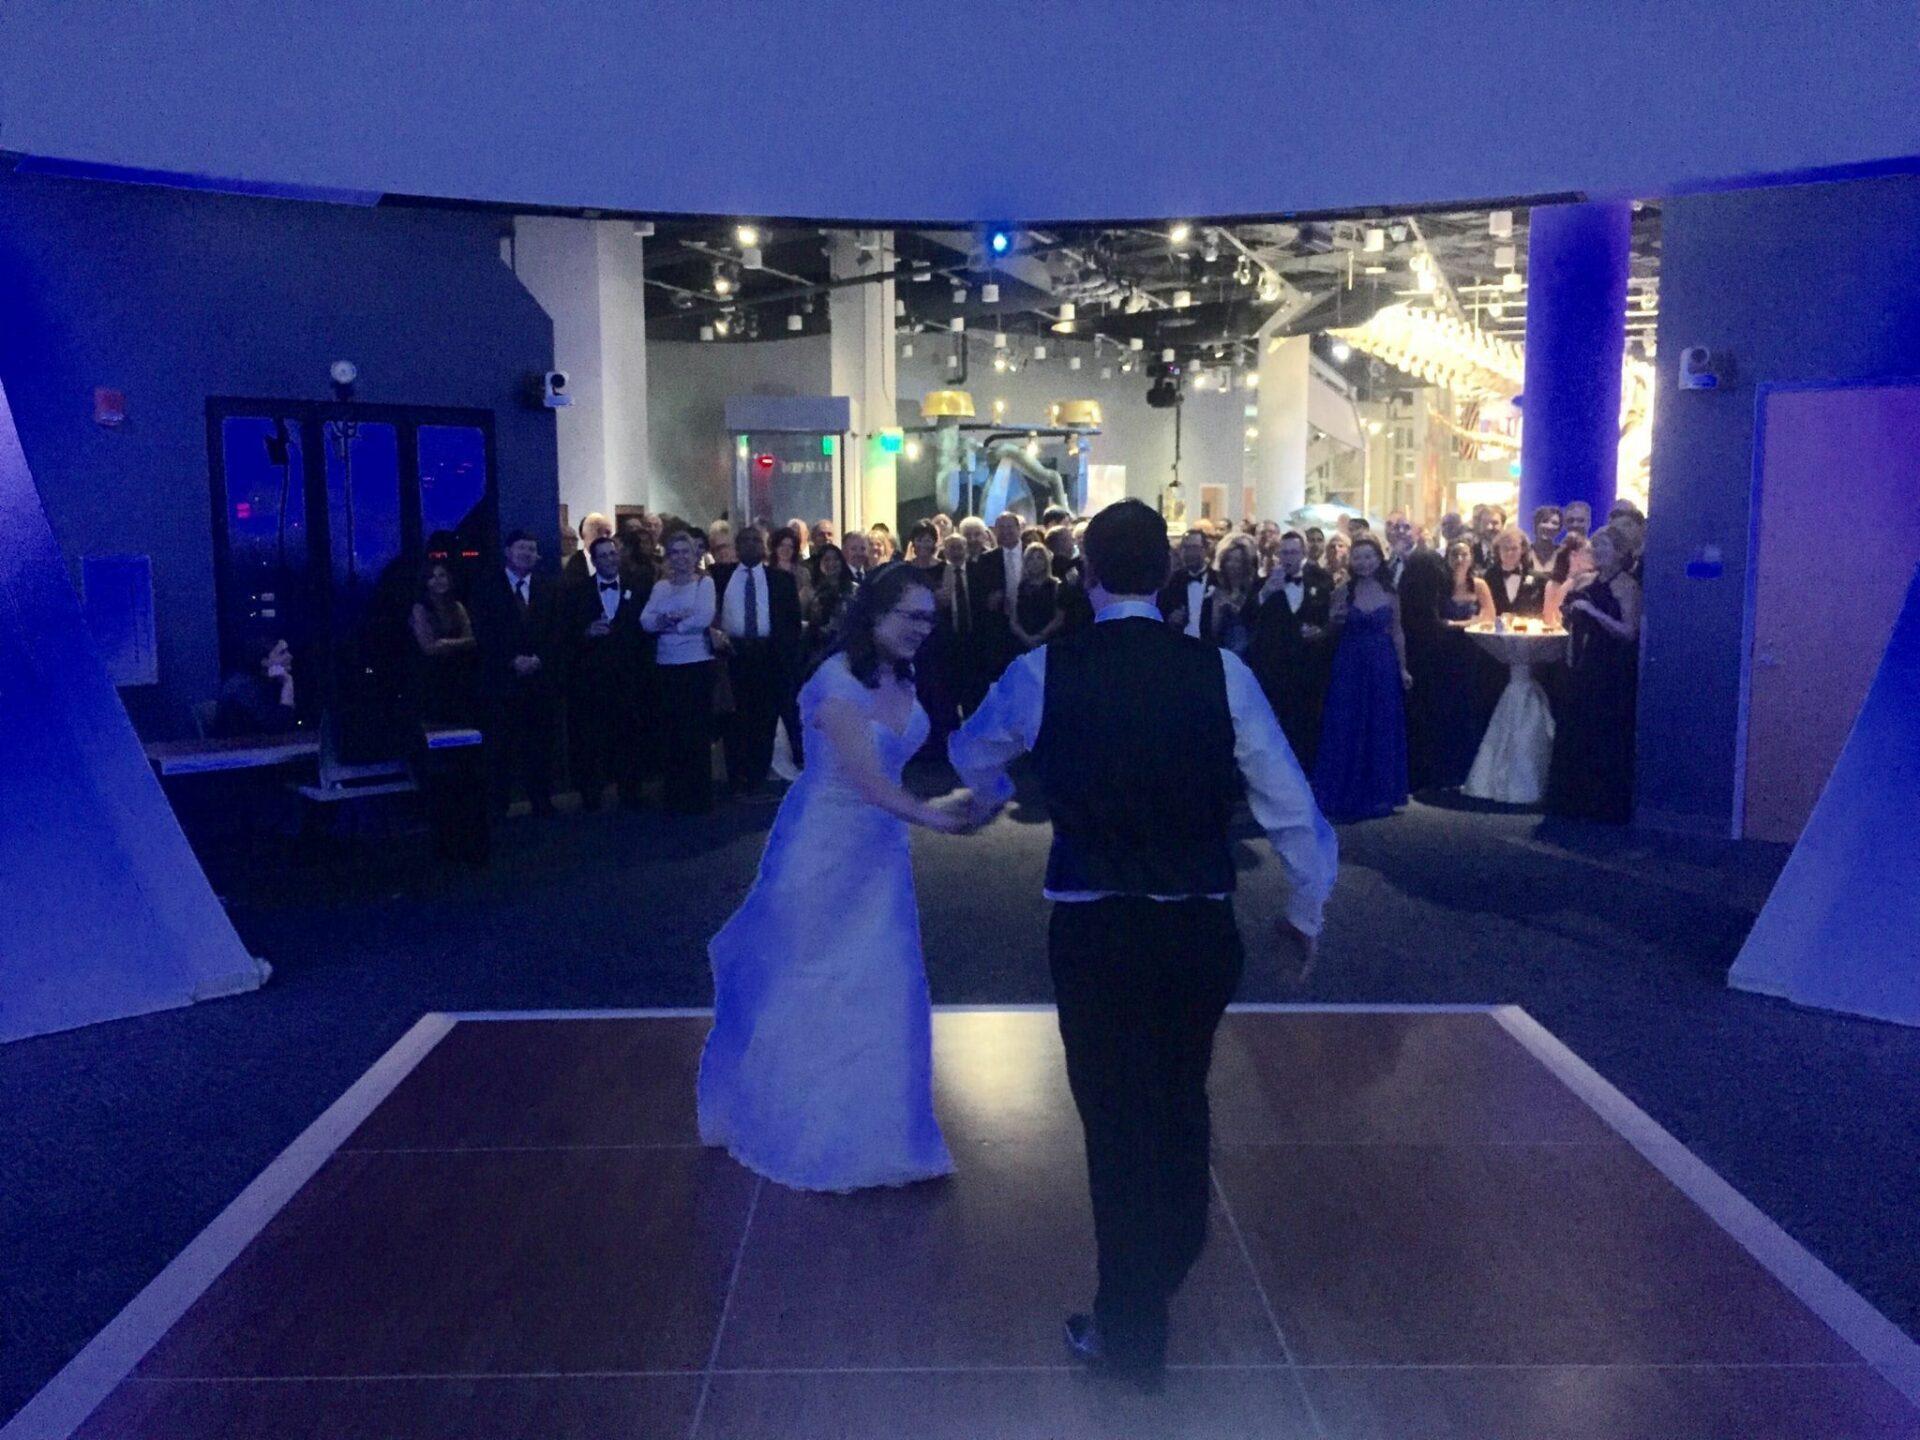 A couple gracefully dances in front of a crowd at their wedding reception, accompanied by the music provided by a Wedding DJ.